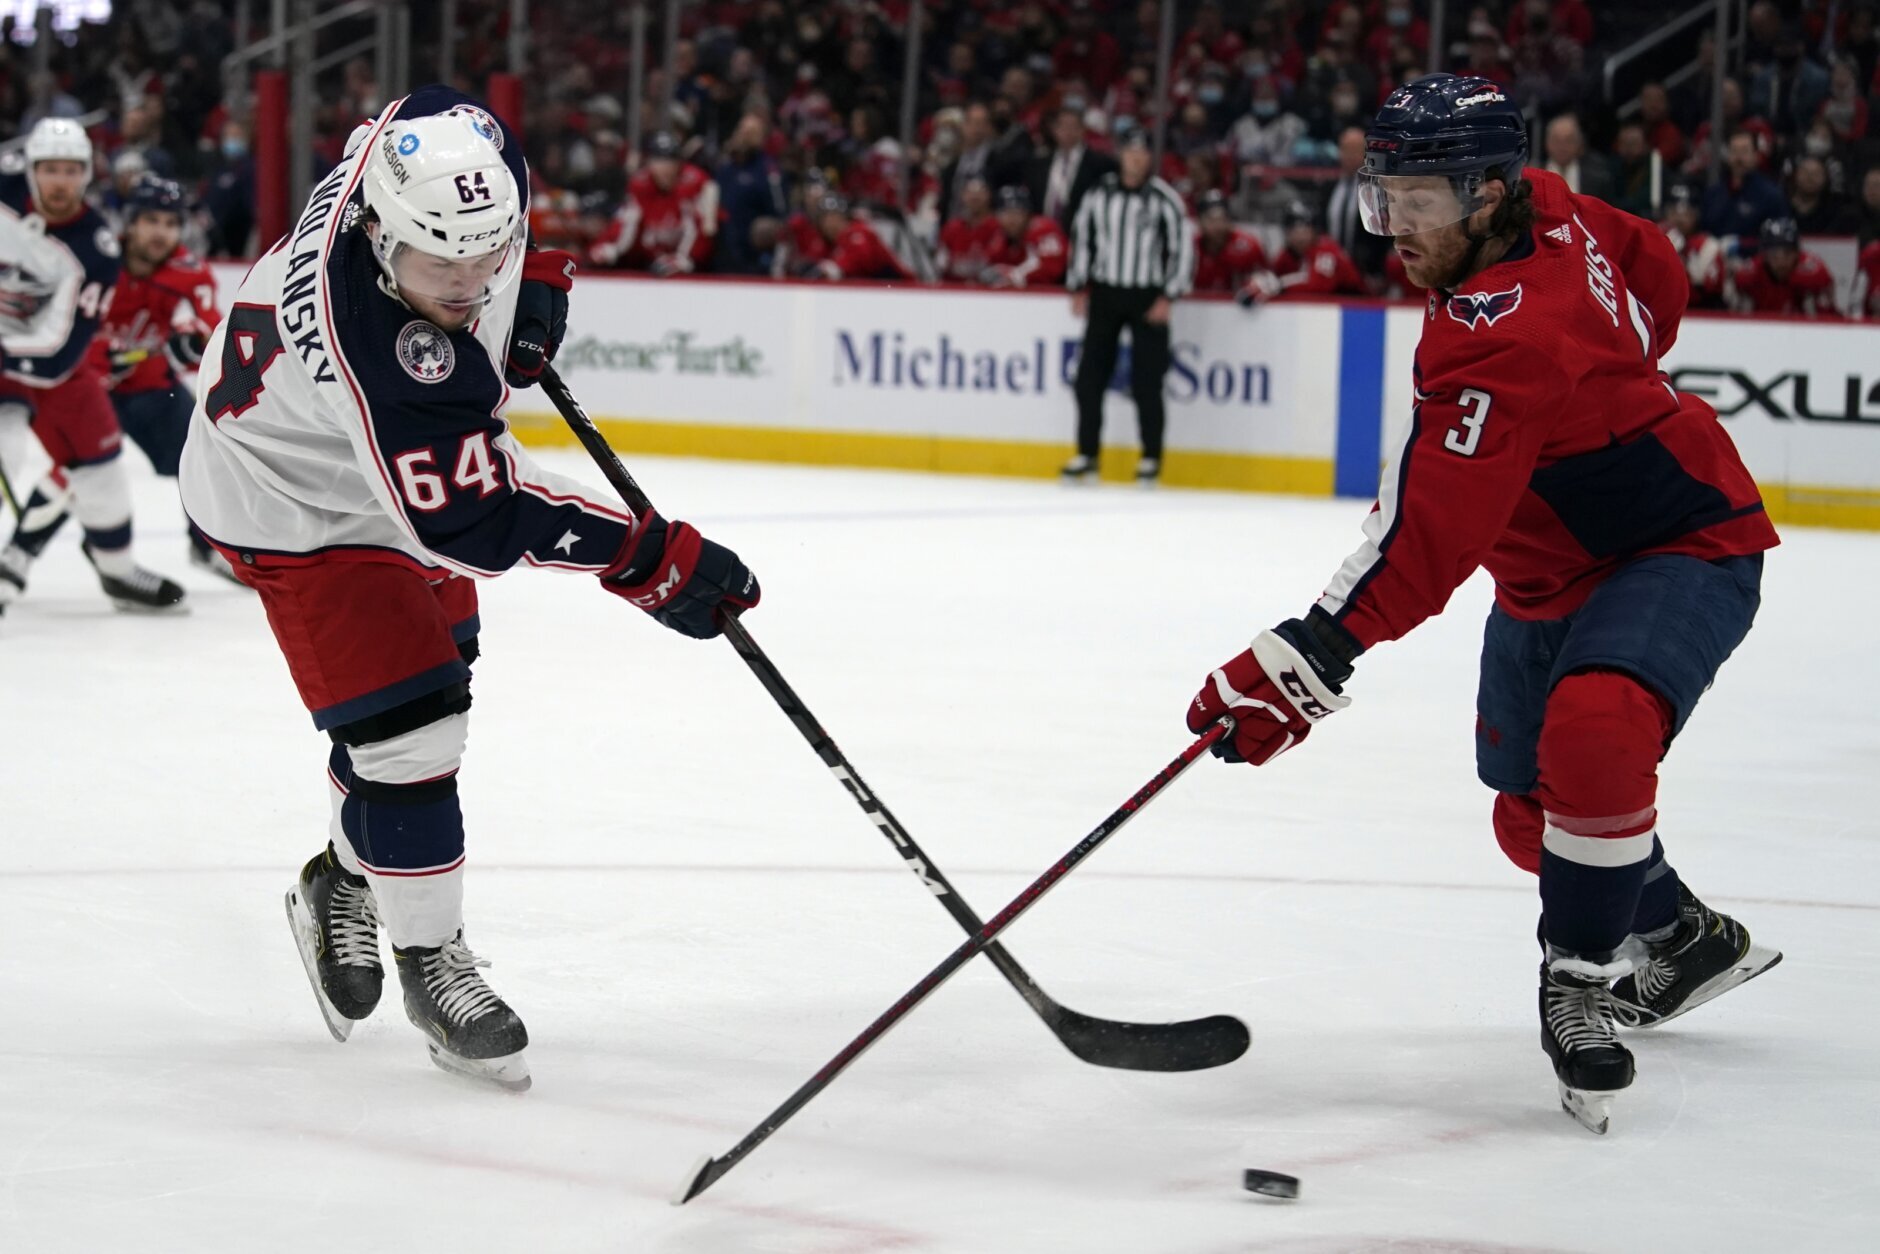 Three Things: Boone Jenner Returns, Cole Sillinger Sits, Is Laine